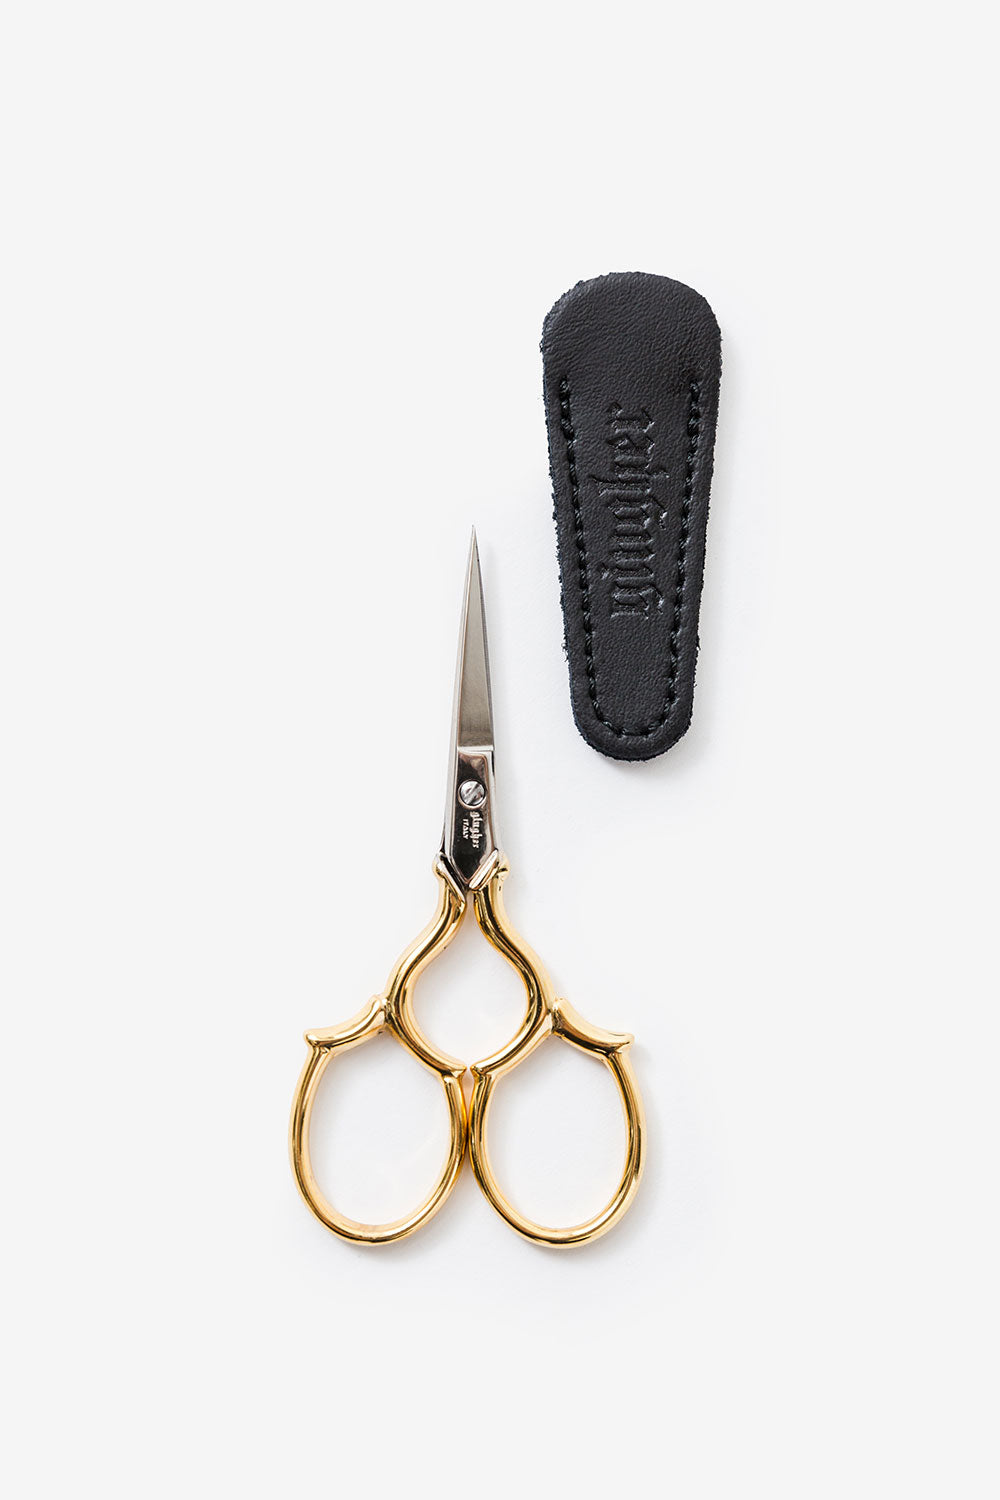 https://cdn.shopify.com/s/files/1/0411/9864/9508/products/the-school-of-making--epalette-embroidery-scissors--diy-kits.jpg?v=1677169263